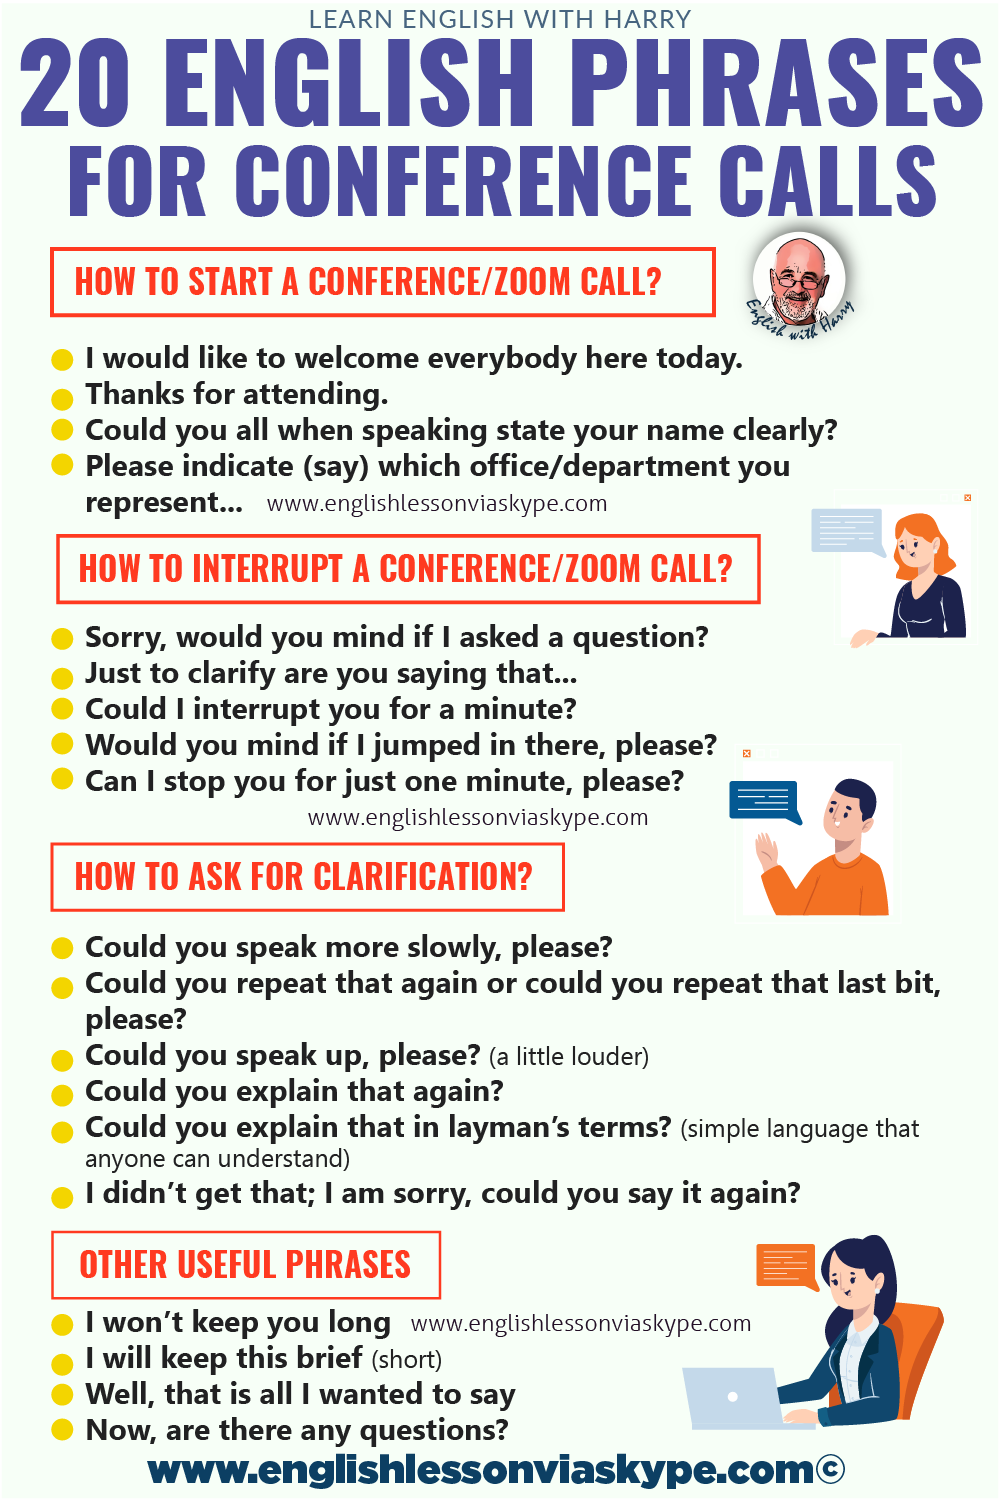 Conference call English vocabulary. Must have phrases for Zoom calls. Advanced English learning. Business English lessons at www.englishlessonviaskype.com #learnenglish #englishlessons